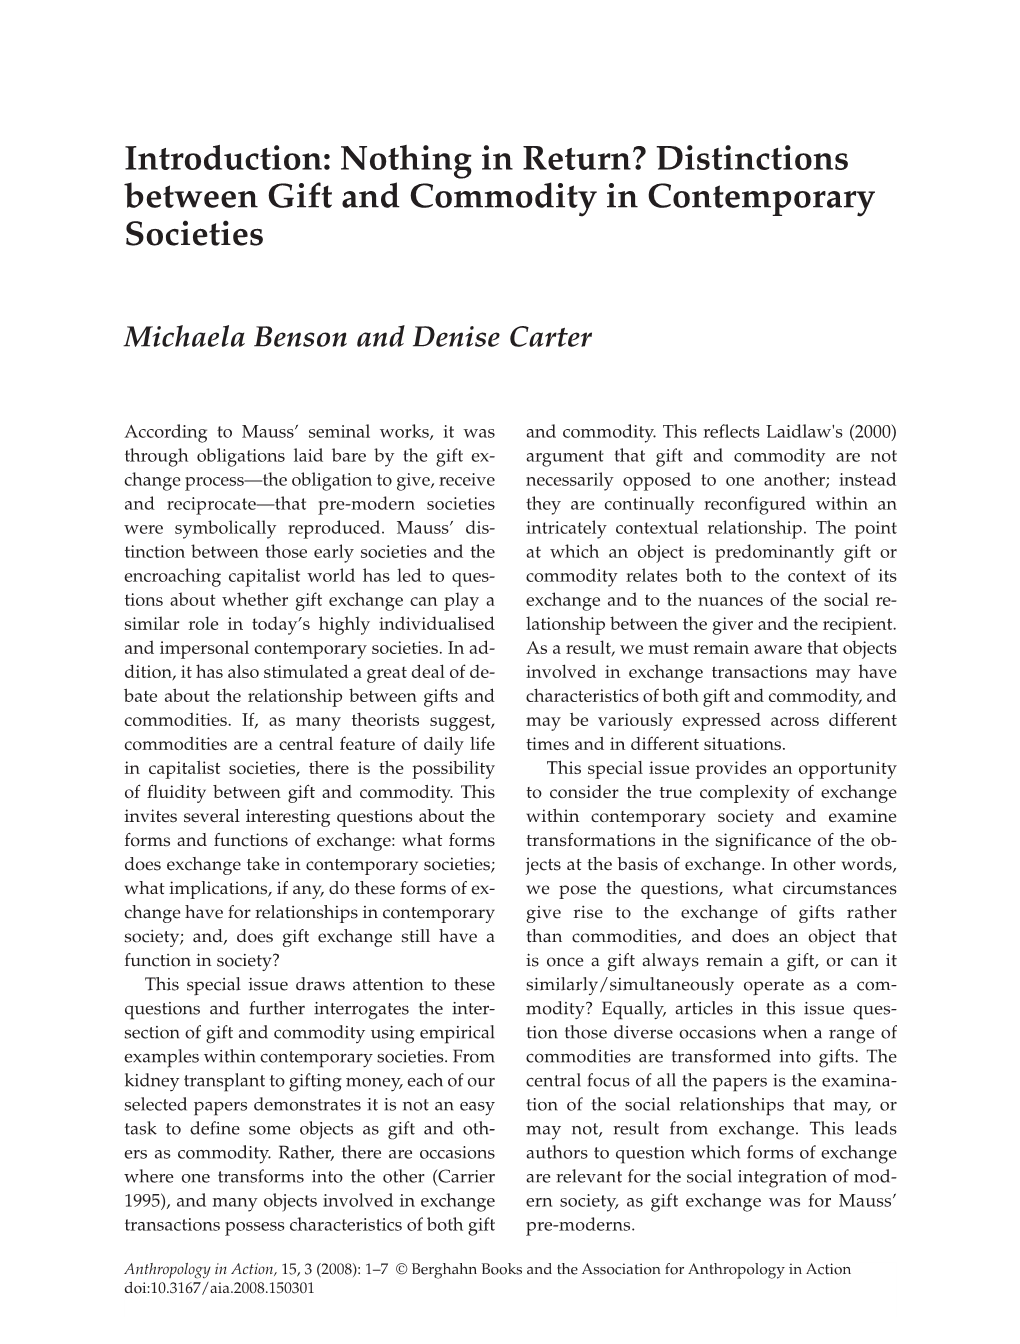 Distinctions Between Gift and Commodity in Contemporary Societies